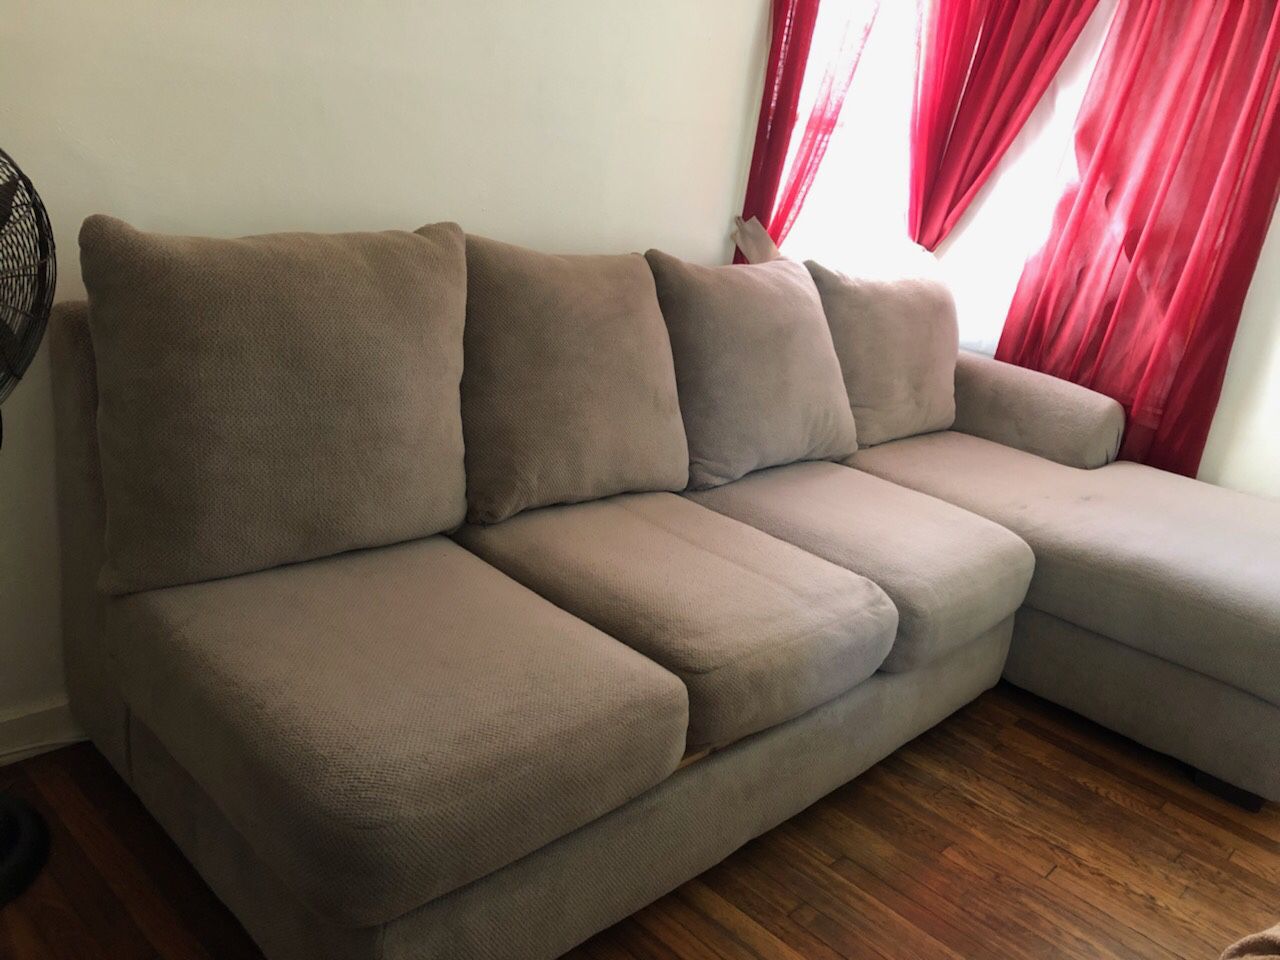 3 piece Sectional couch. Sits like 10